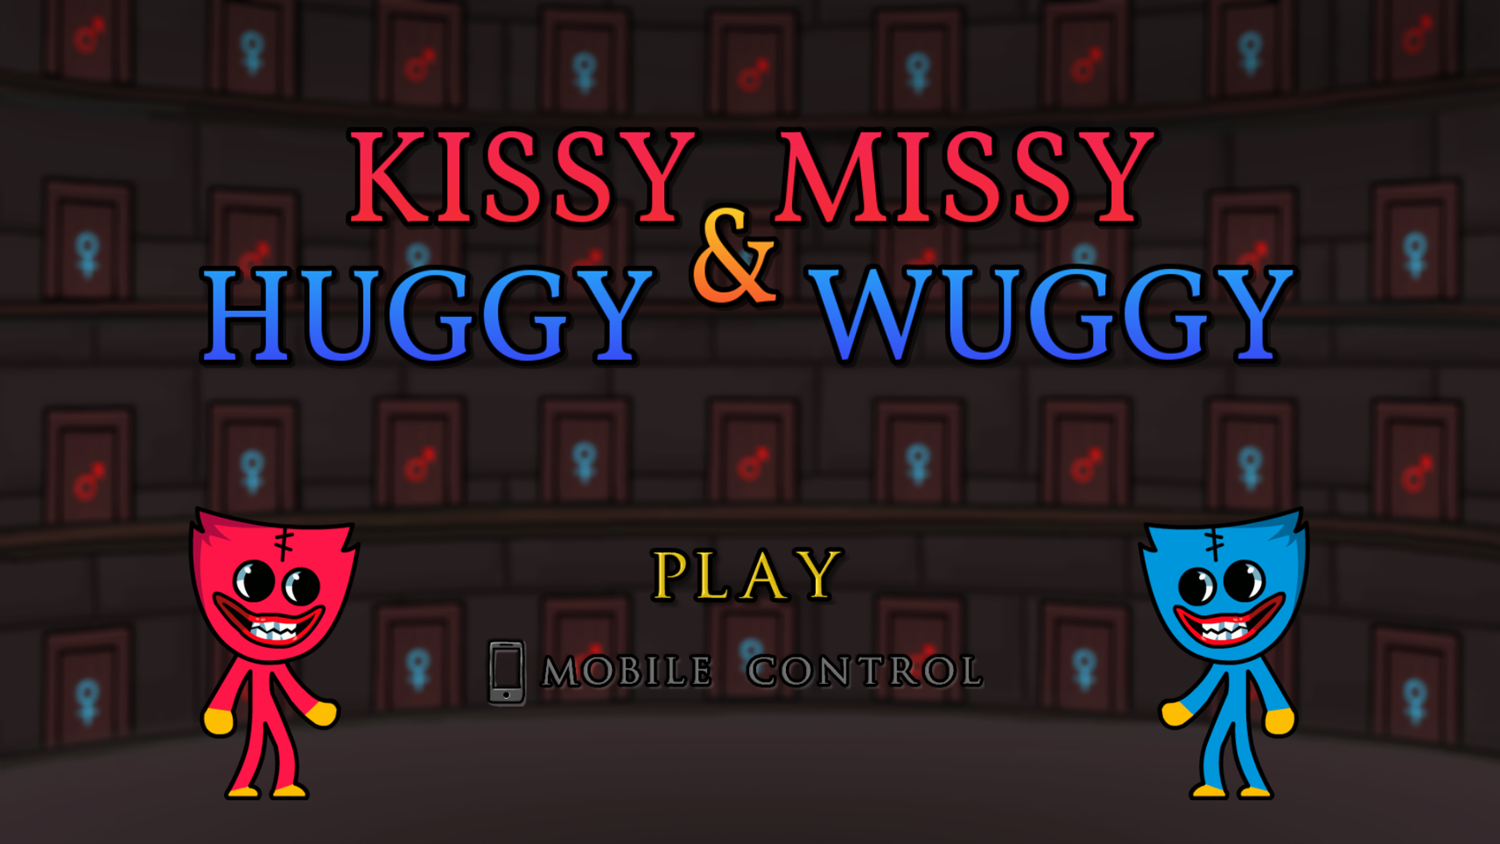 Usage: Kissy Missy.exe is a software program designed to create and send virtual kisses and hugs.
Associated Software: Huggy Wuggy is a companion software that allows users to receive and display virtual kisses and hugs sent through Kissy Missy.exe.